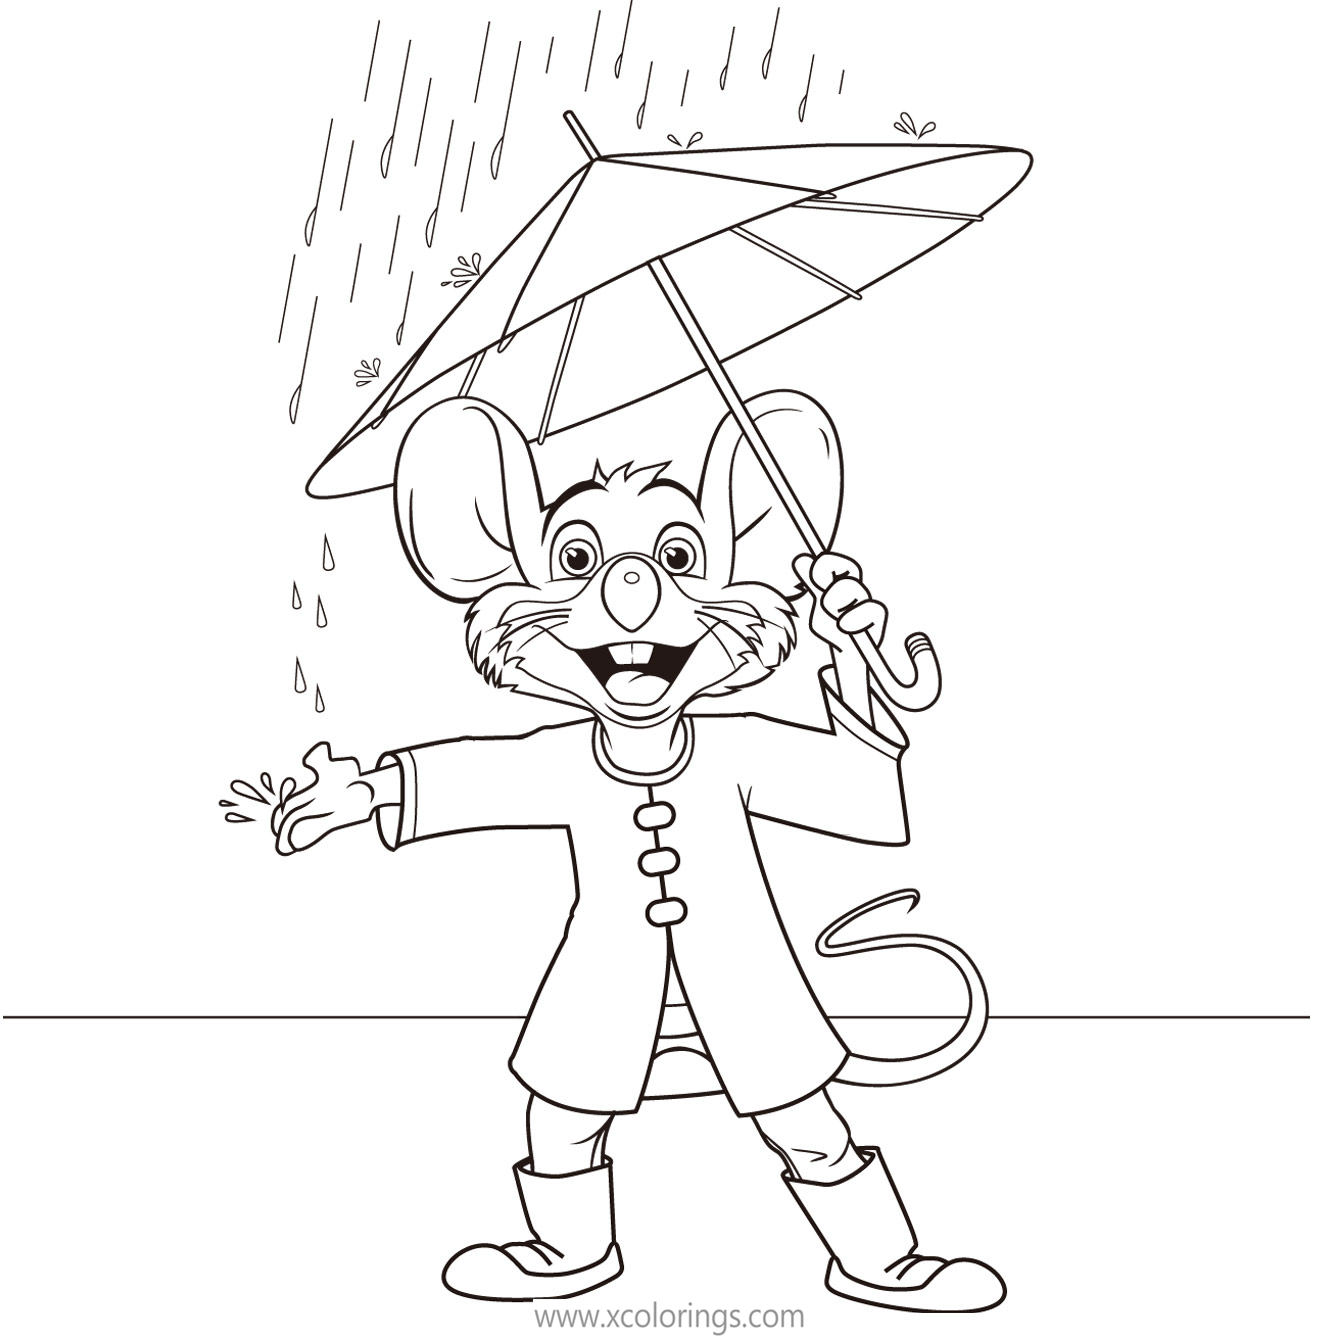 Free Chuck E Cheese Coloring Pages Rain printable